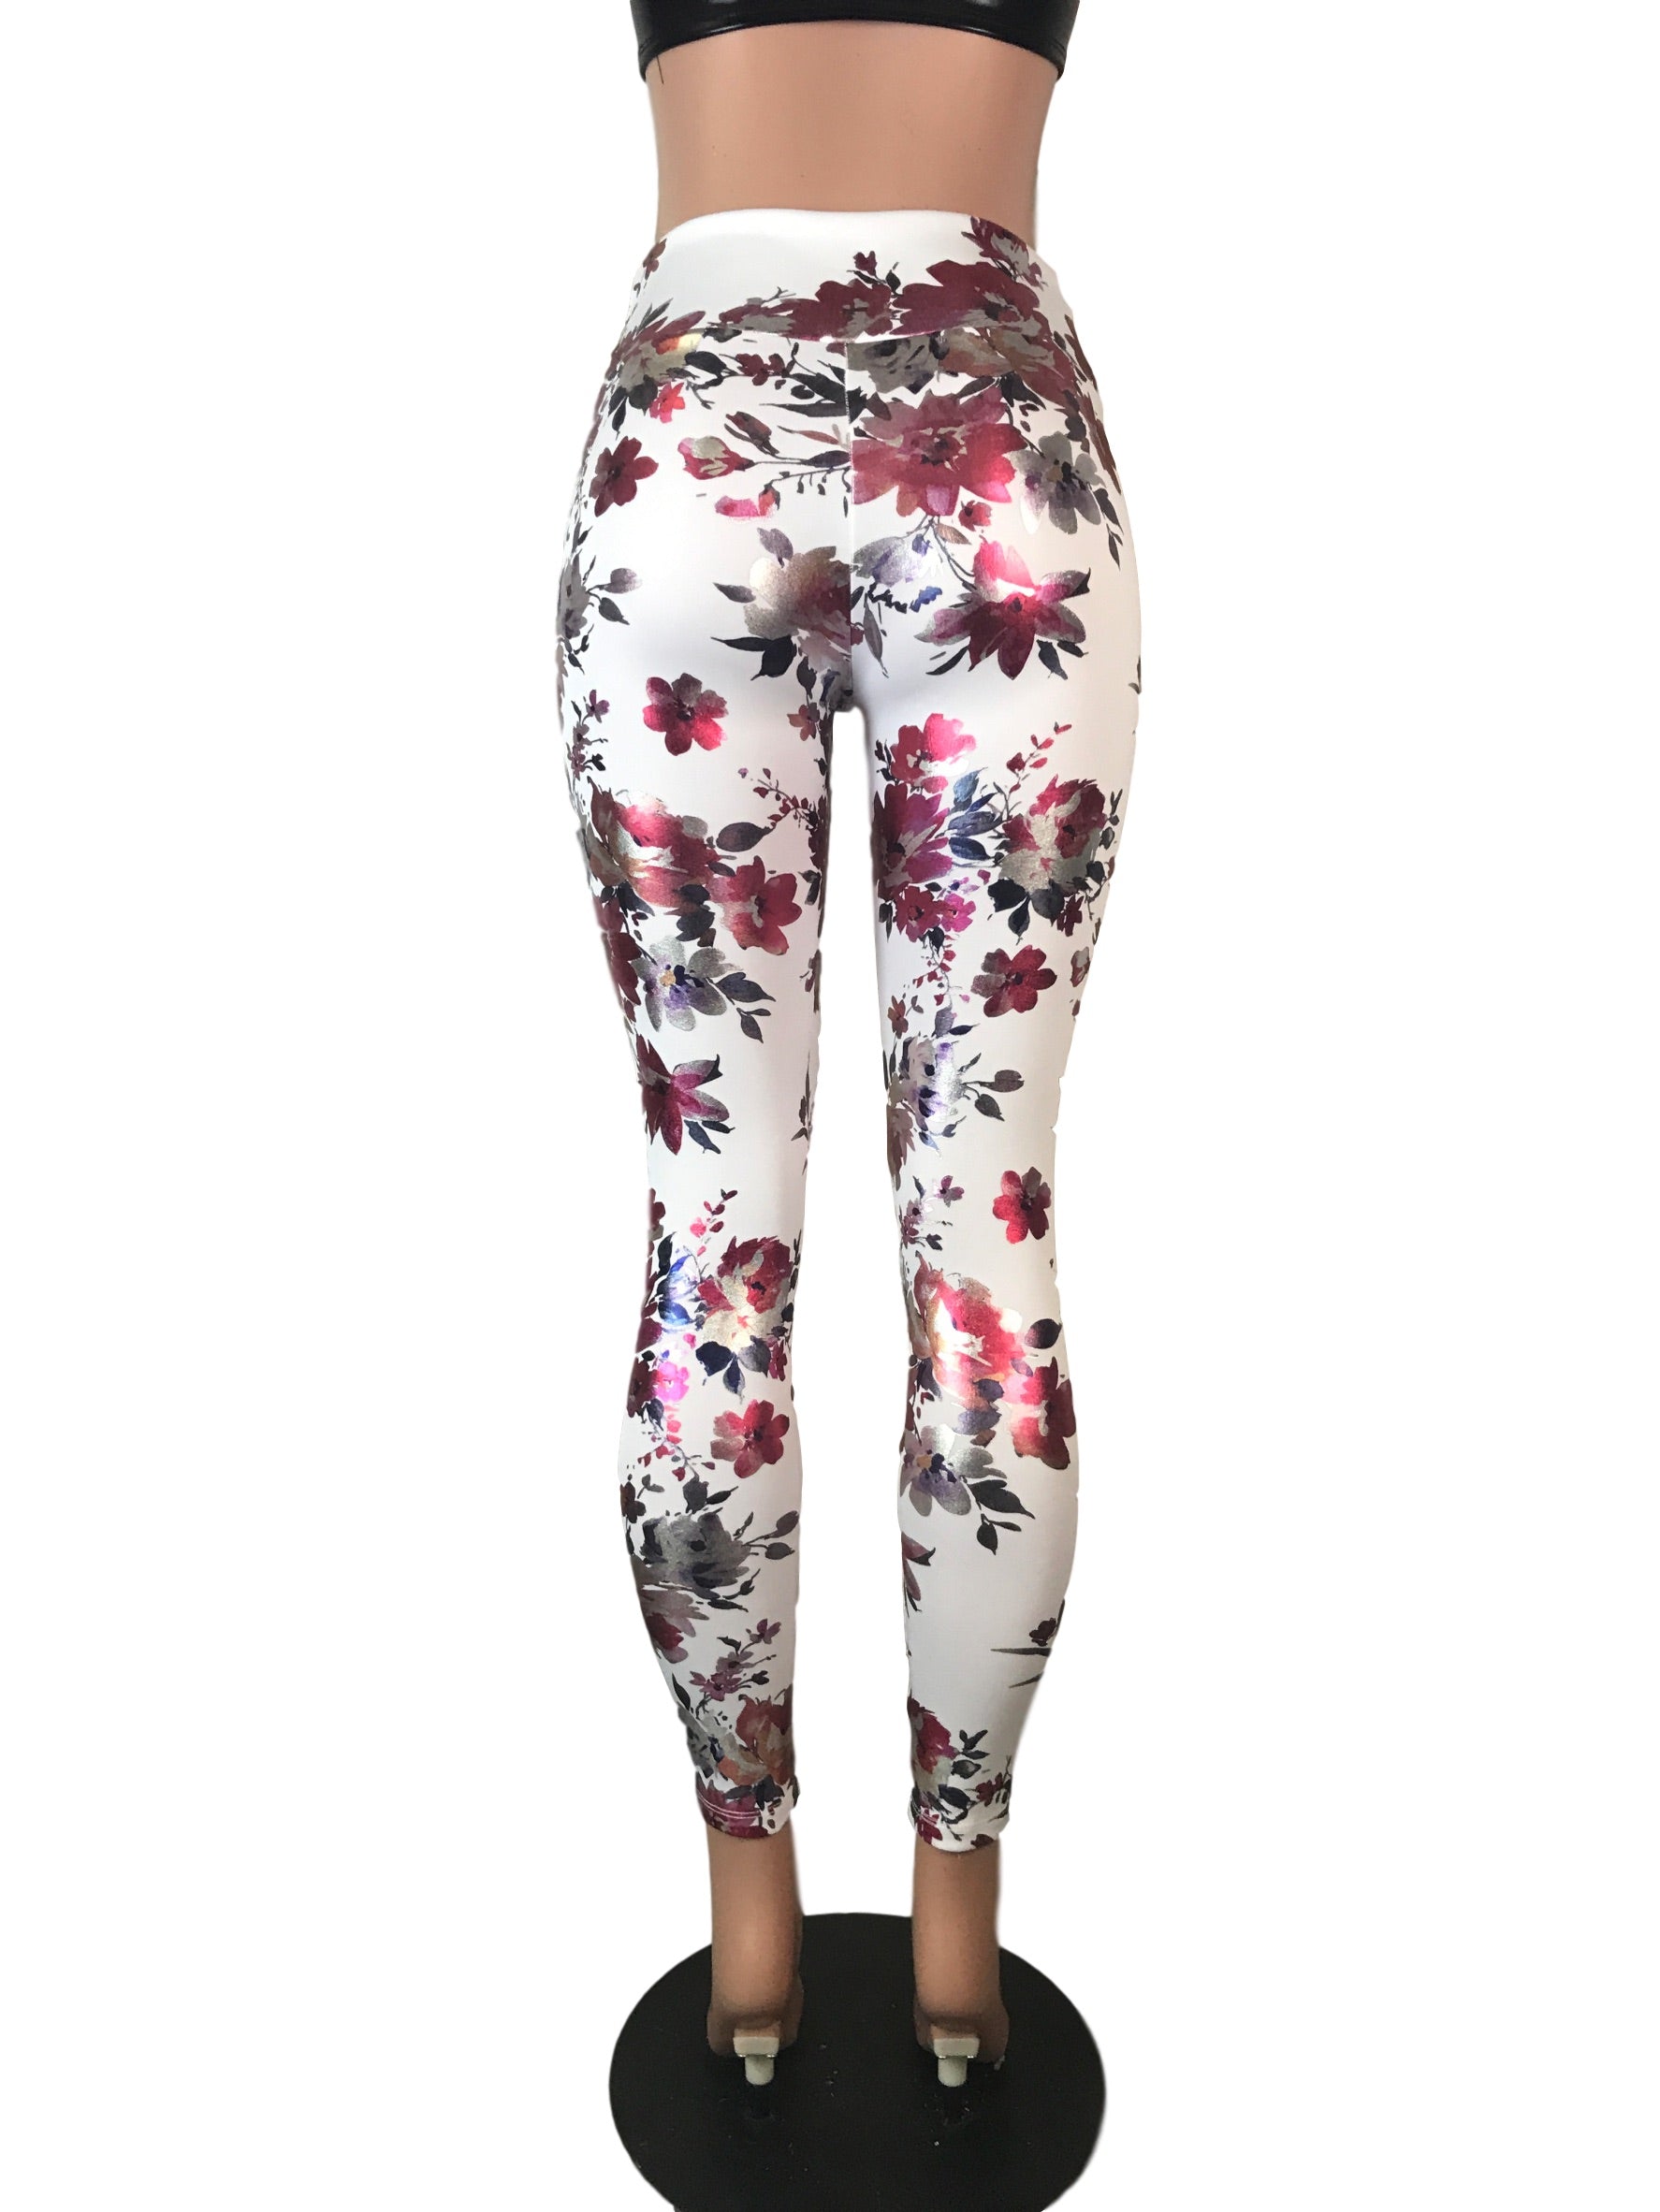 SALE - SMALL ONLY - Floral Metallic High-Waisted Leggings Pants